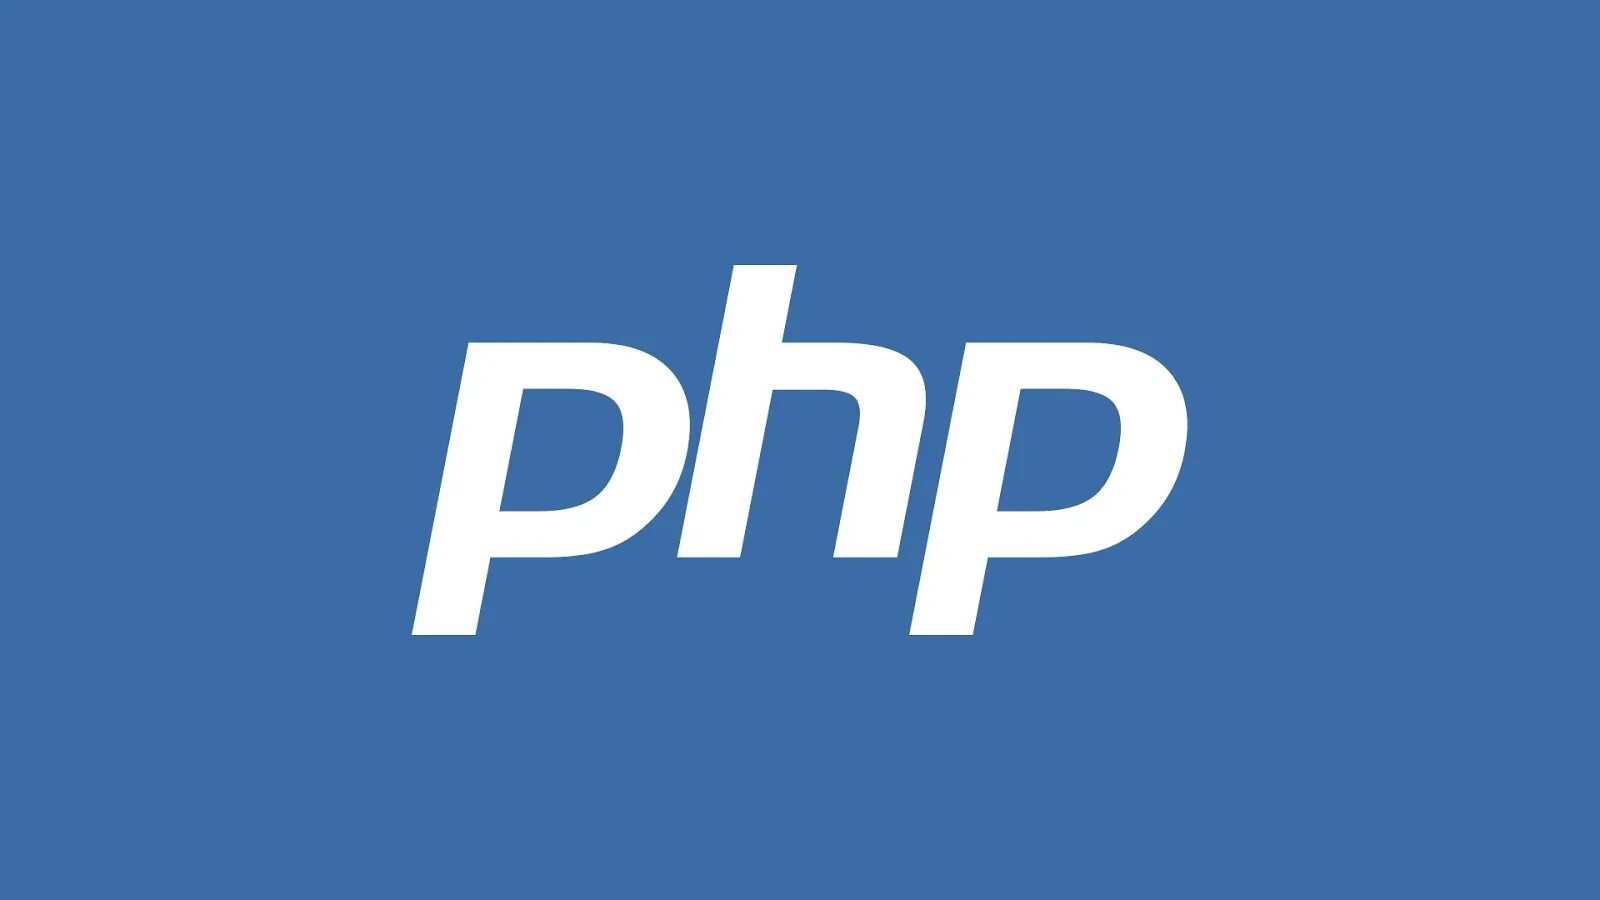 Php. Php эмблема. Php картинка. Значок php. Php 7.0